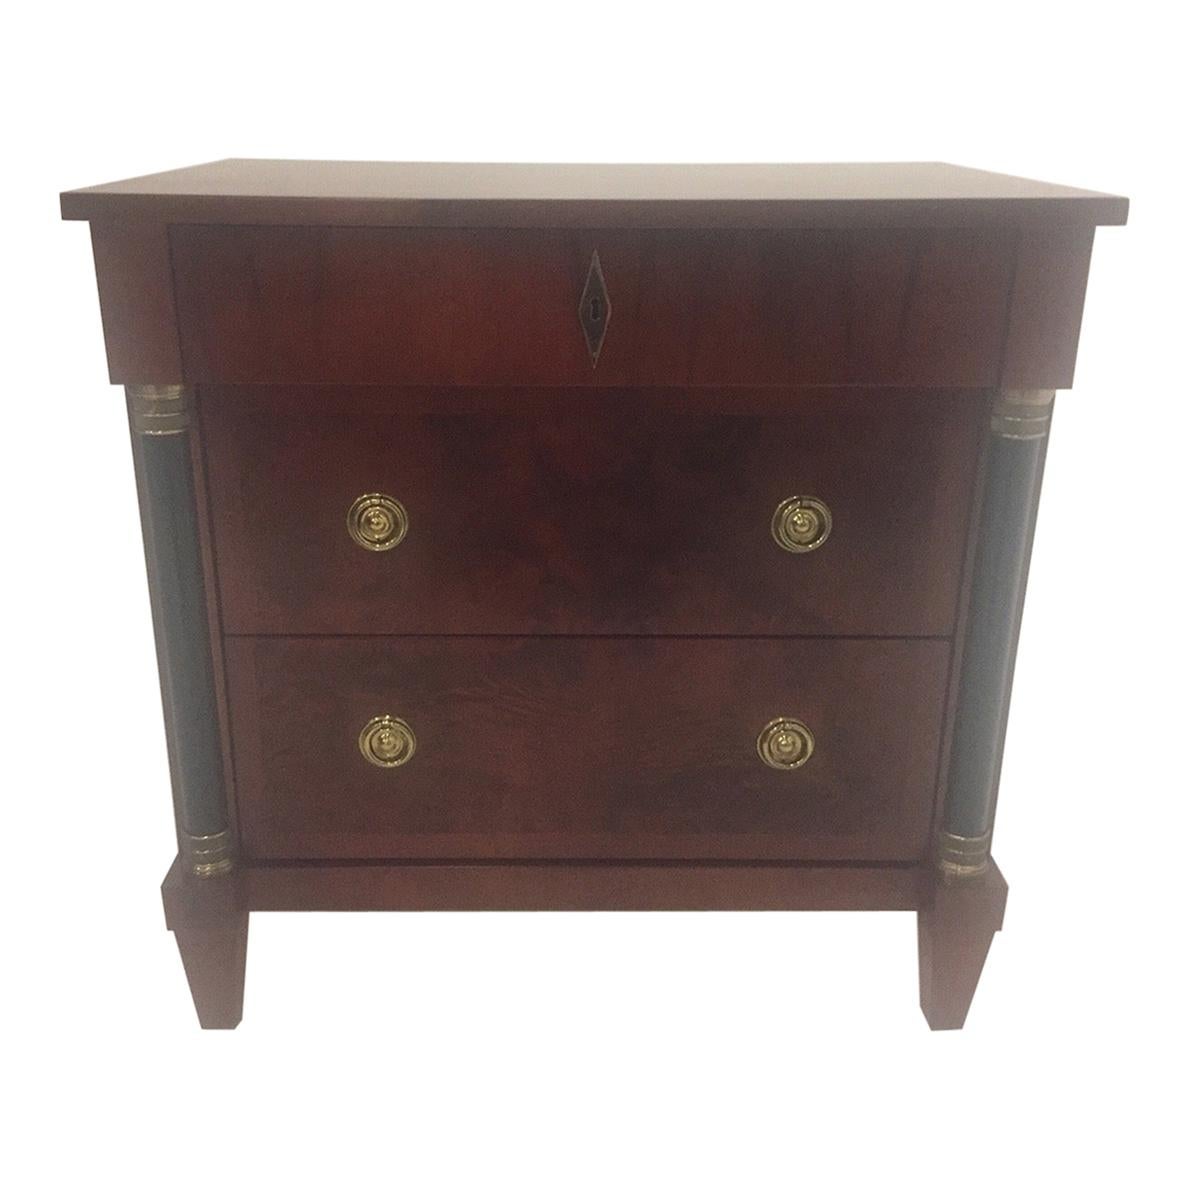 Mahogany Empire Style Small Chest of Drawers Commode